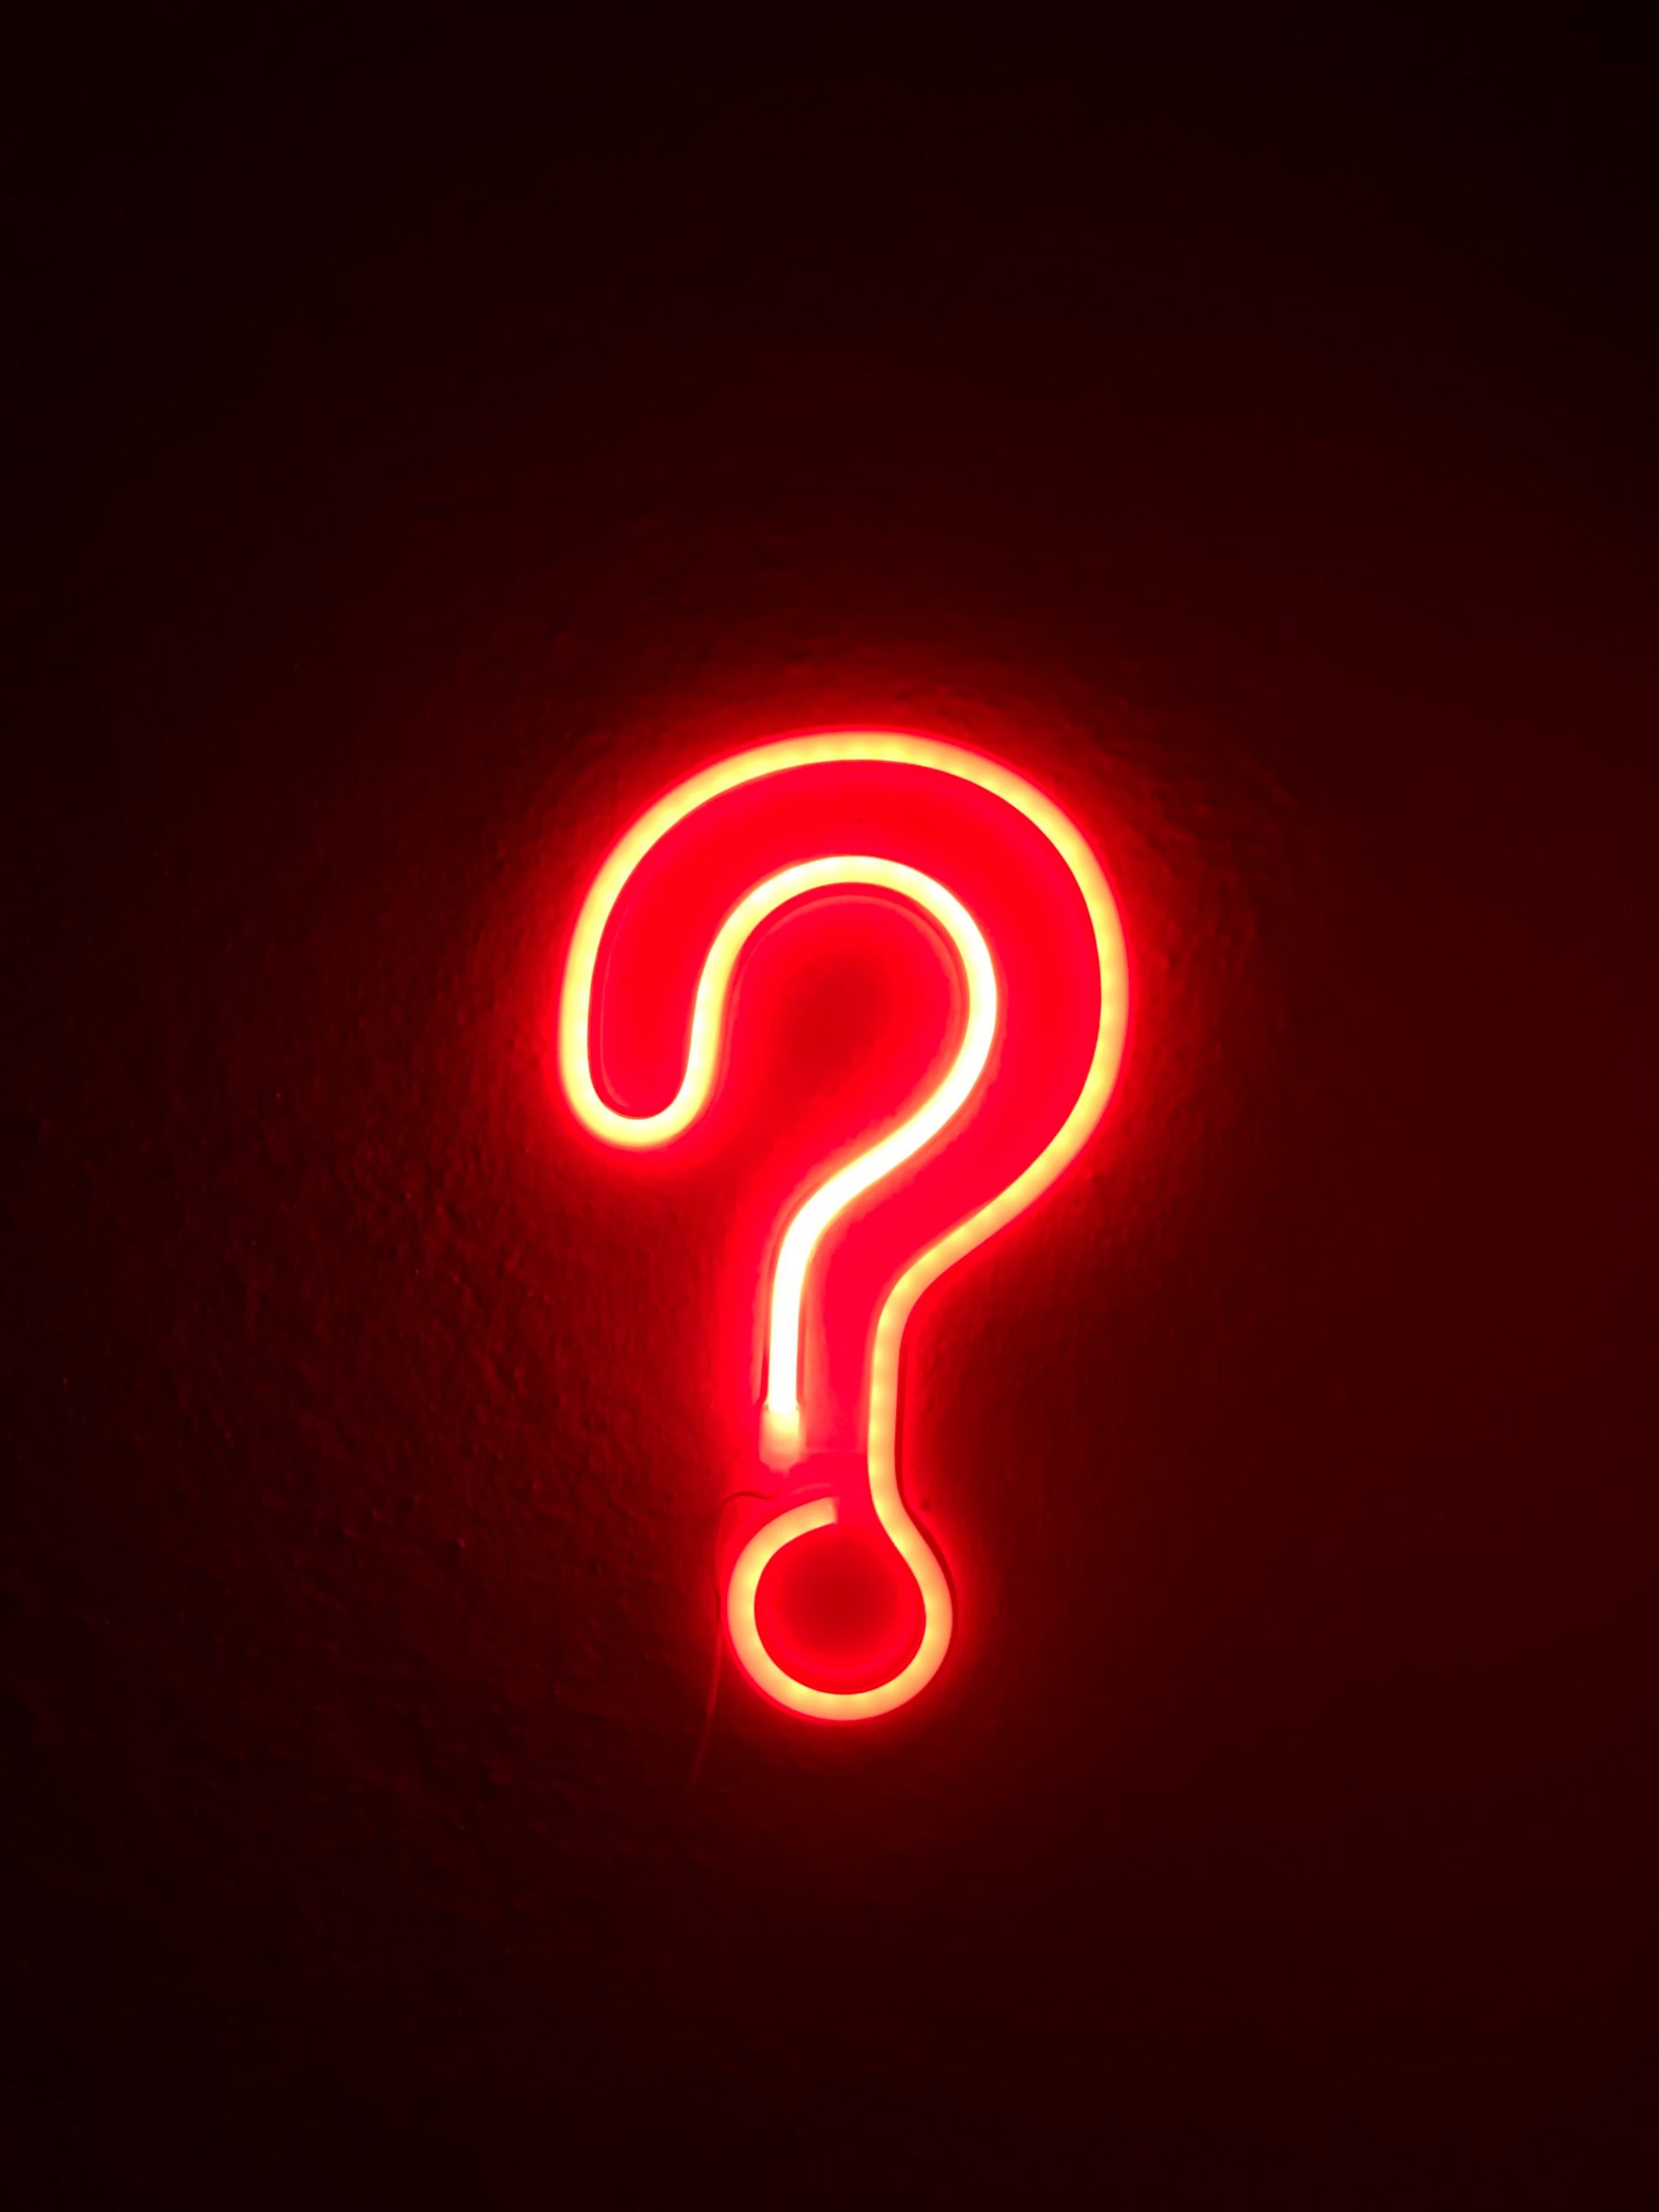 A red neon sign shaped as a question mark against a dark wall